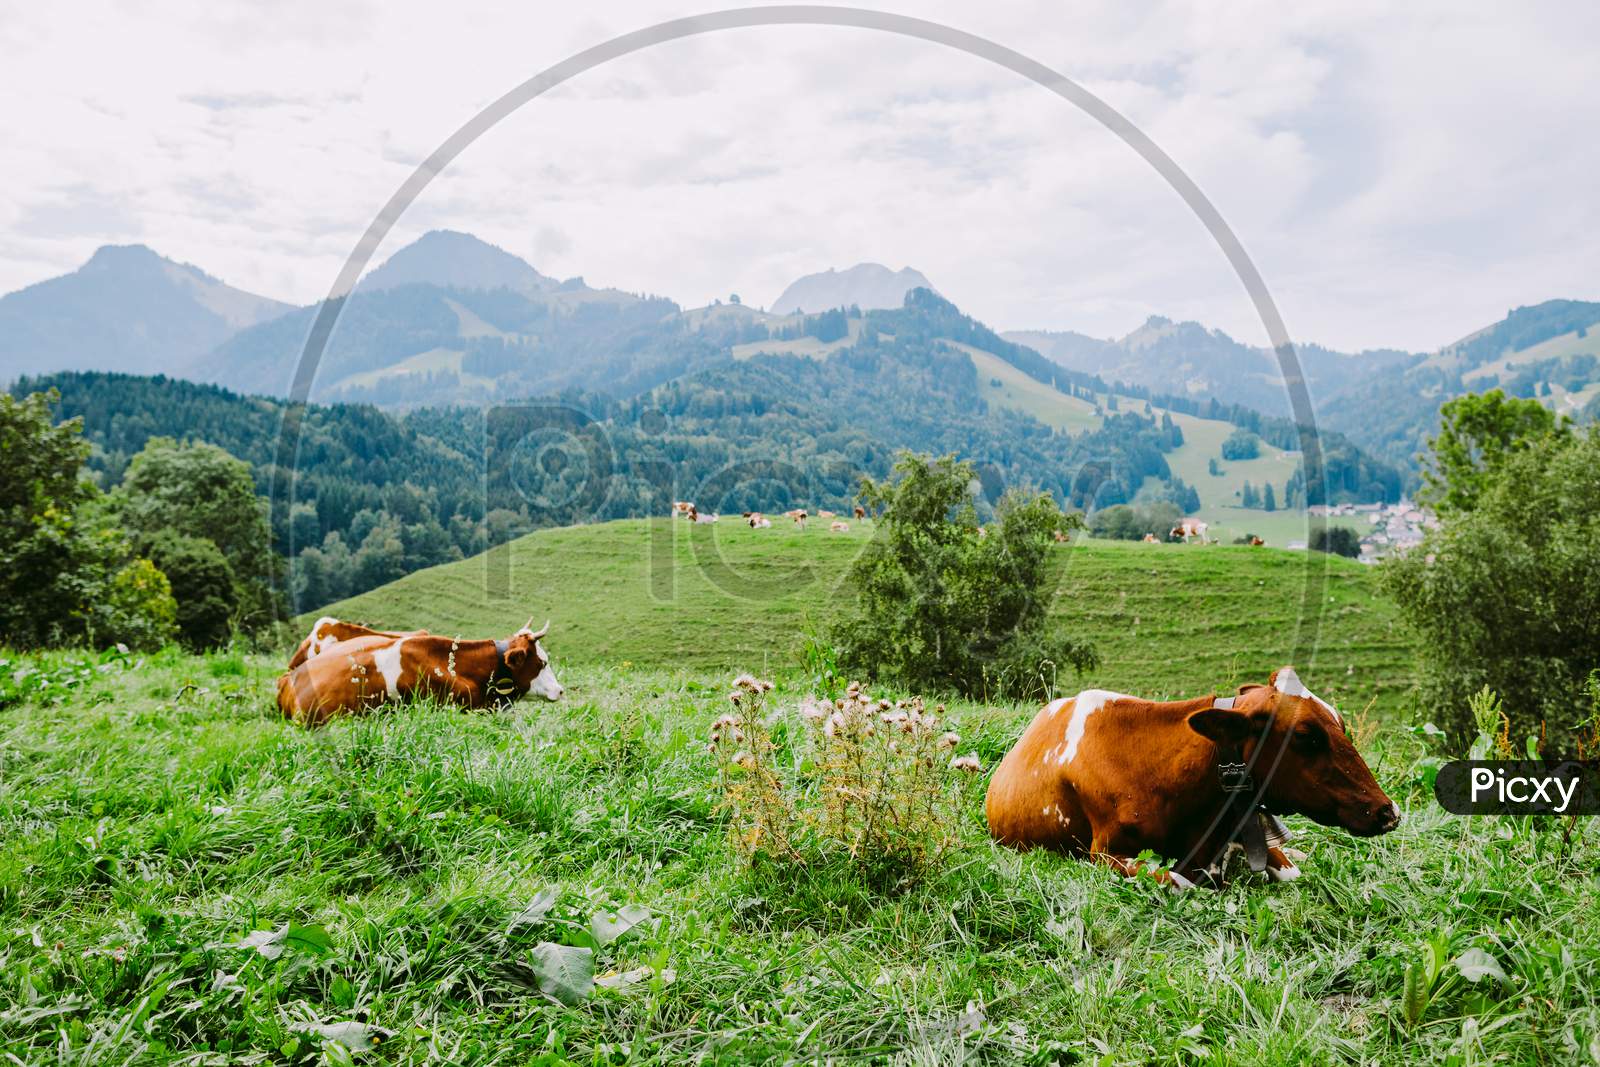 Cows Graze In The Meadow With Mountain View